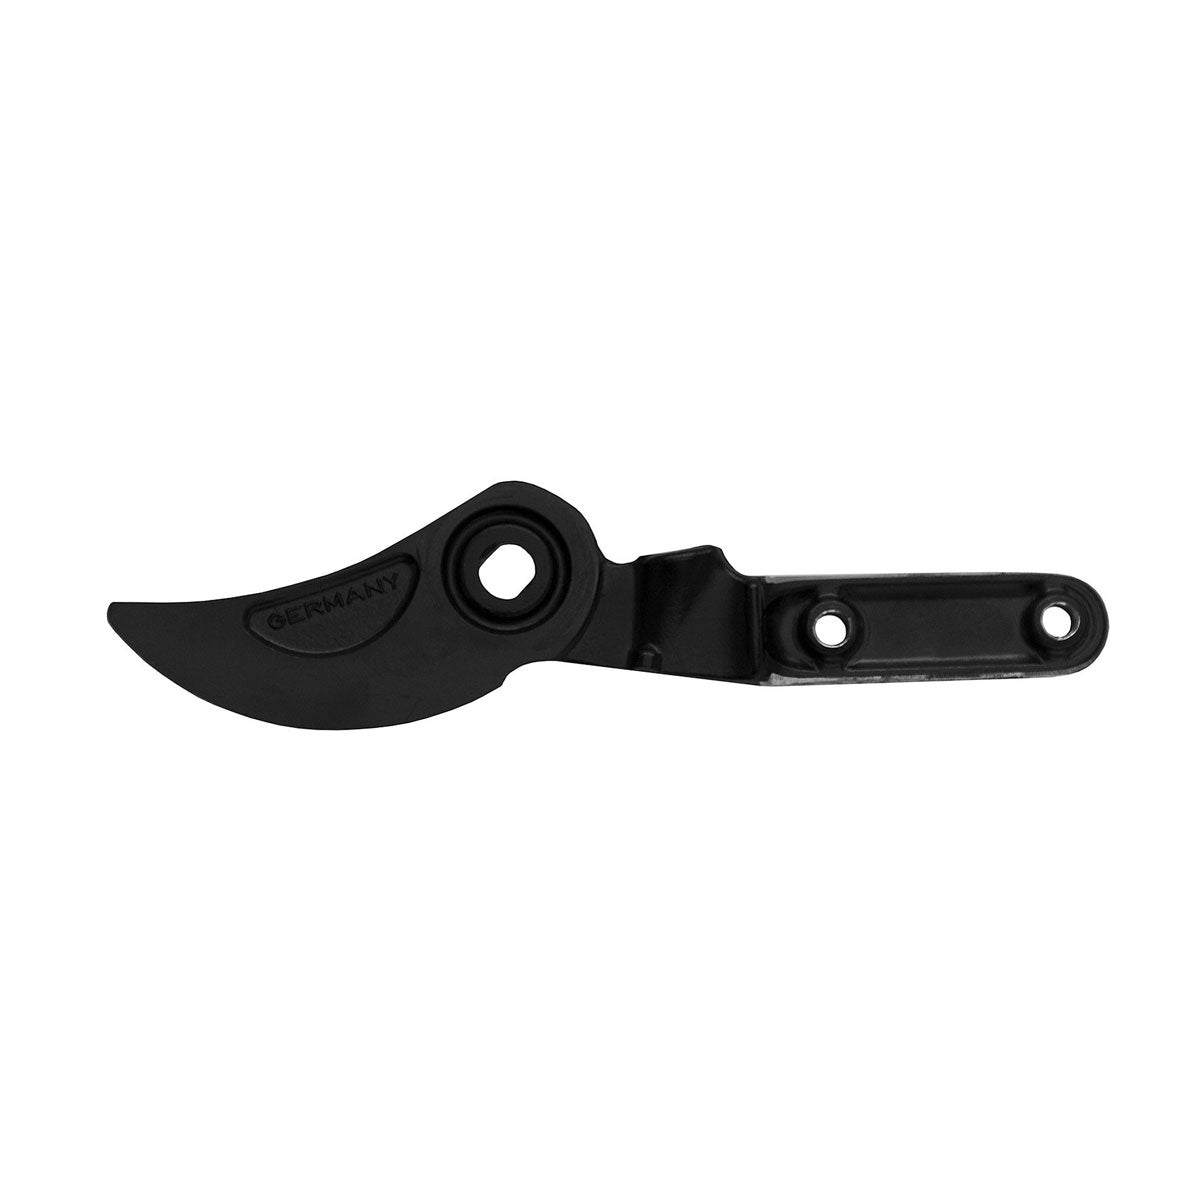 Berger 94009 Blade for 4210, 4214